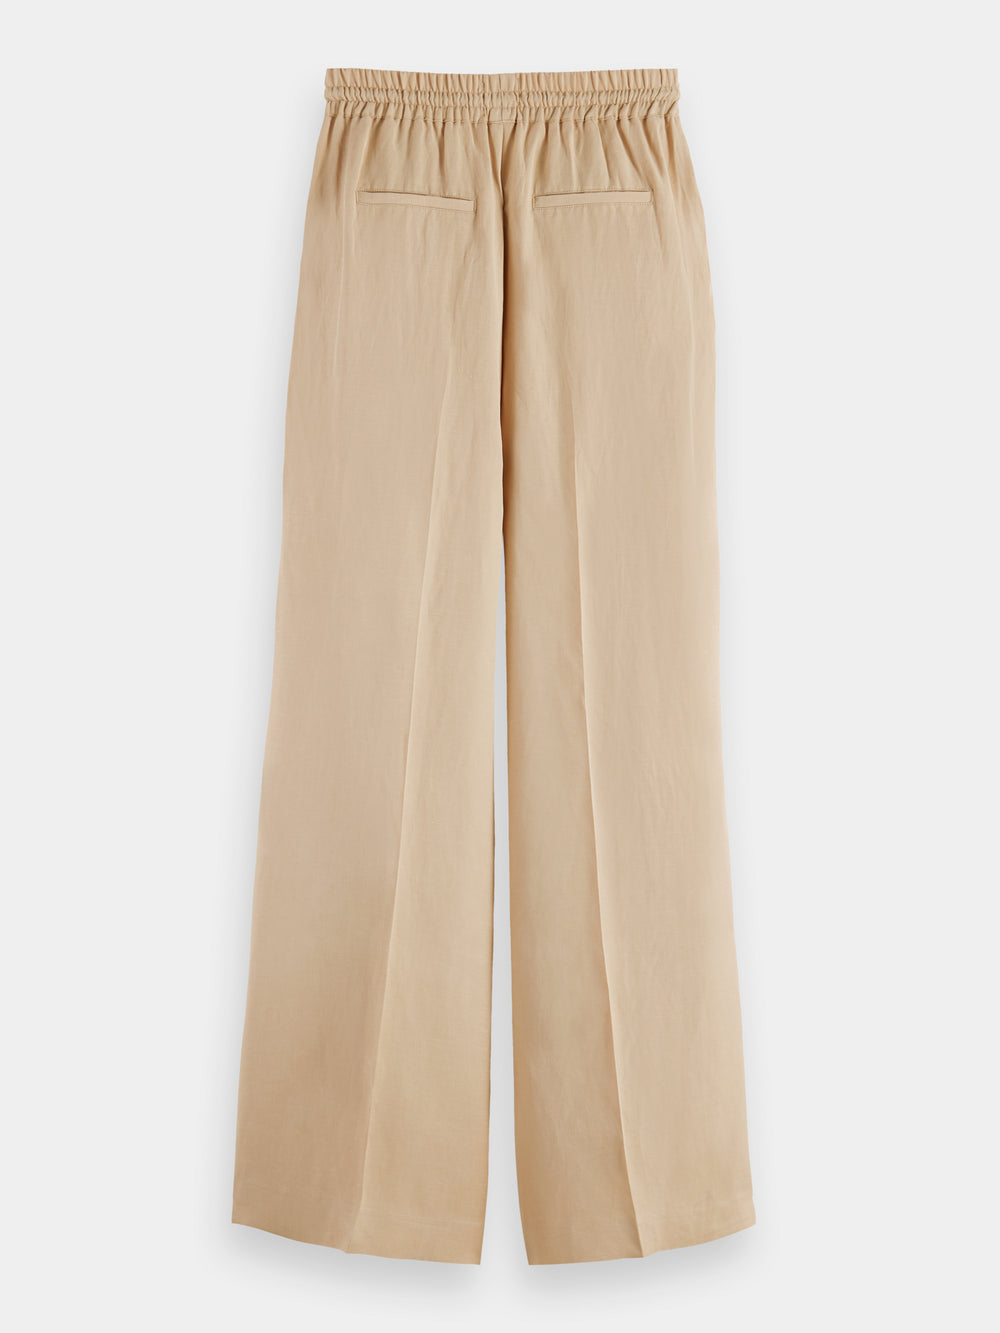 Cotton Relax Ankle Pants (Stripe)